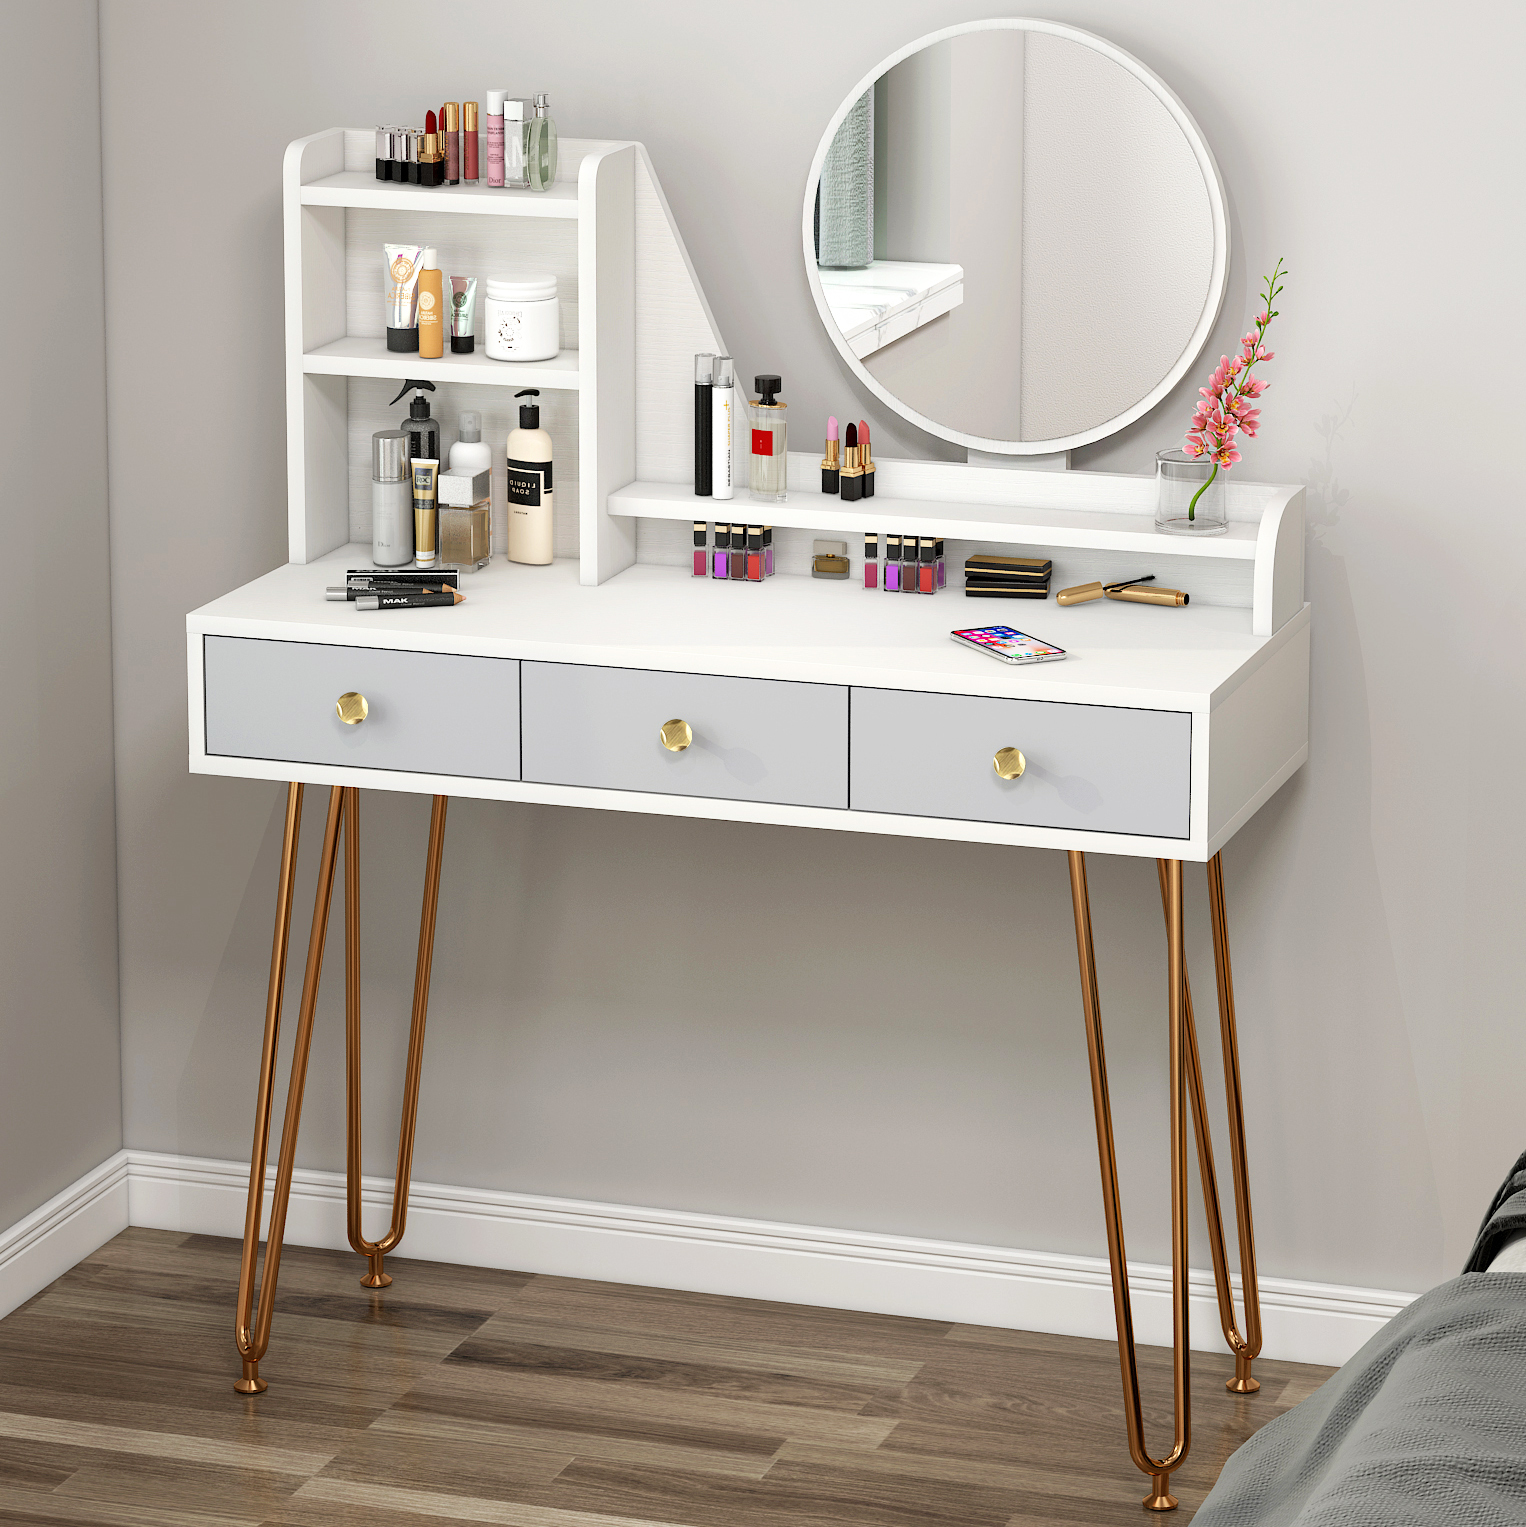 Caesar Deluxe Large Dresser Vanity Table with Mirror and Storage Drawers 